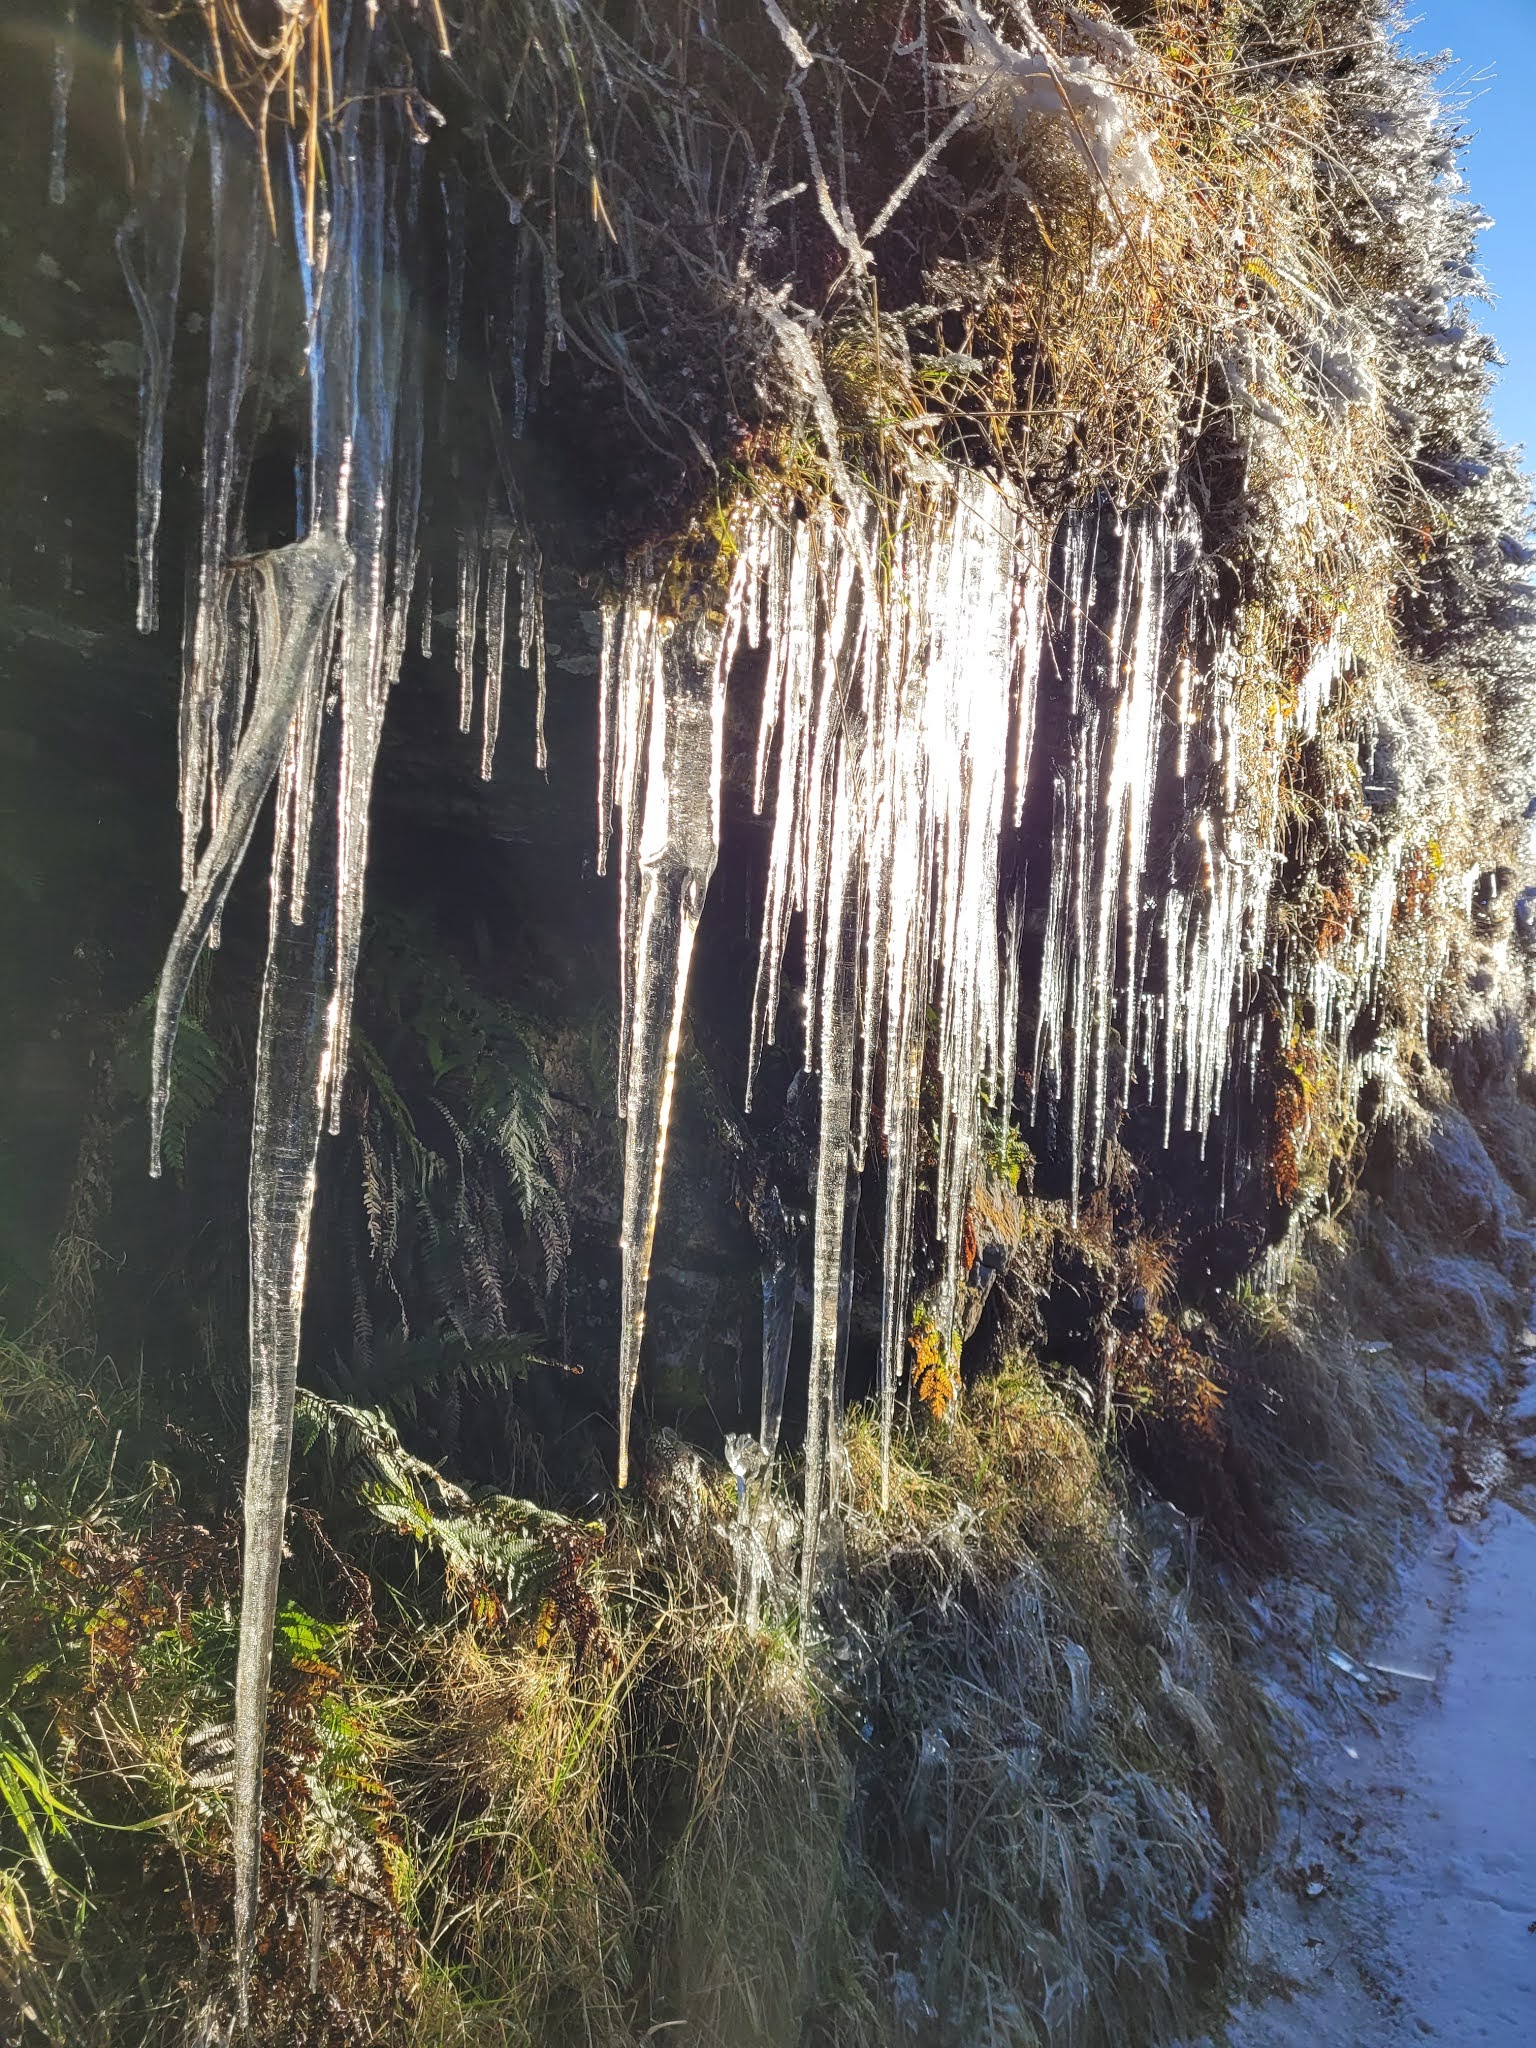 The Cut icicles